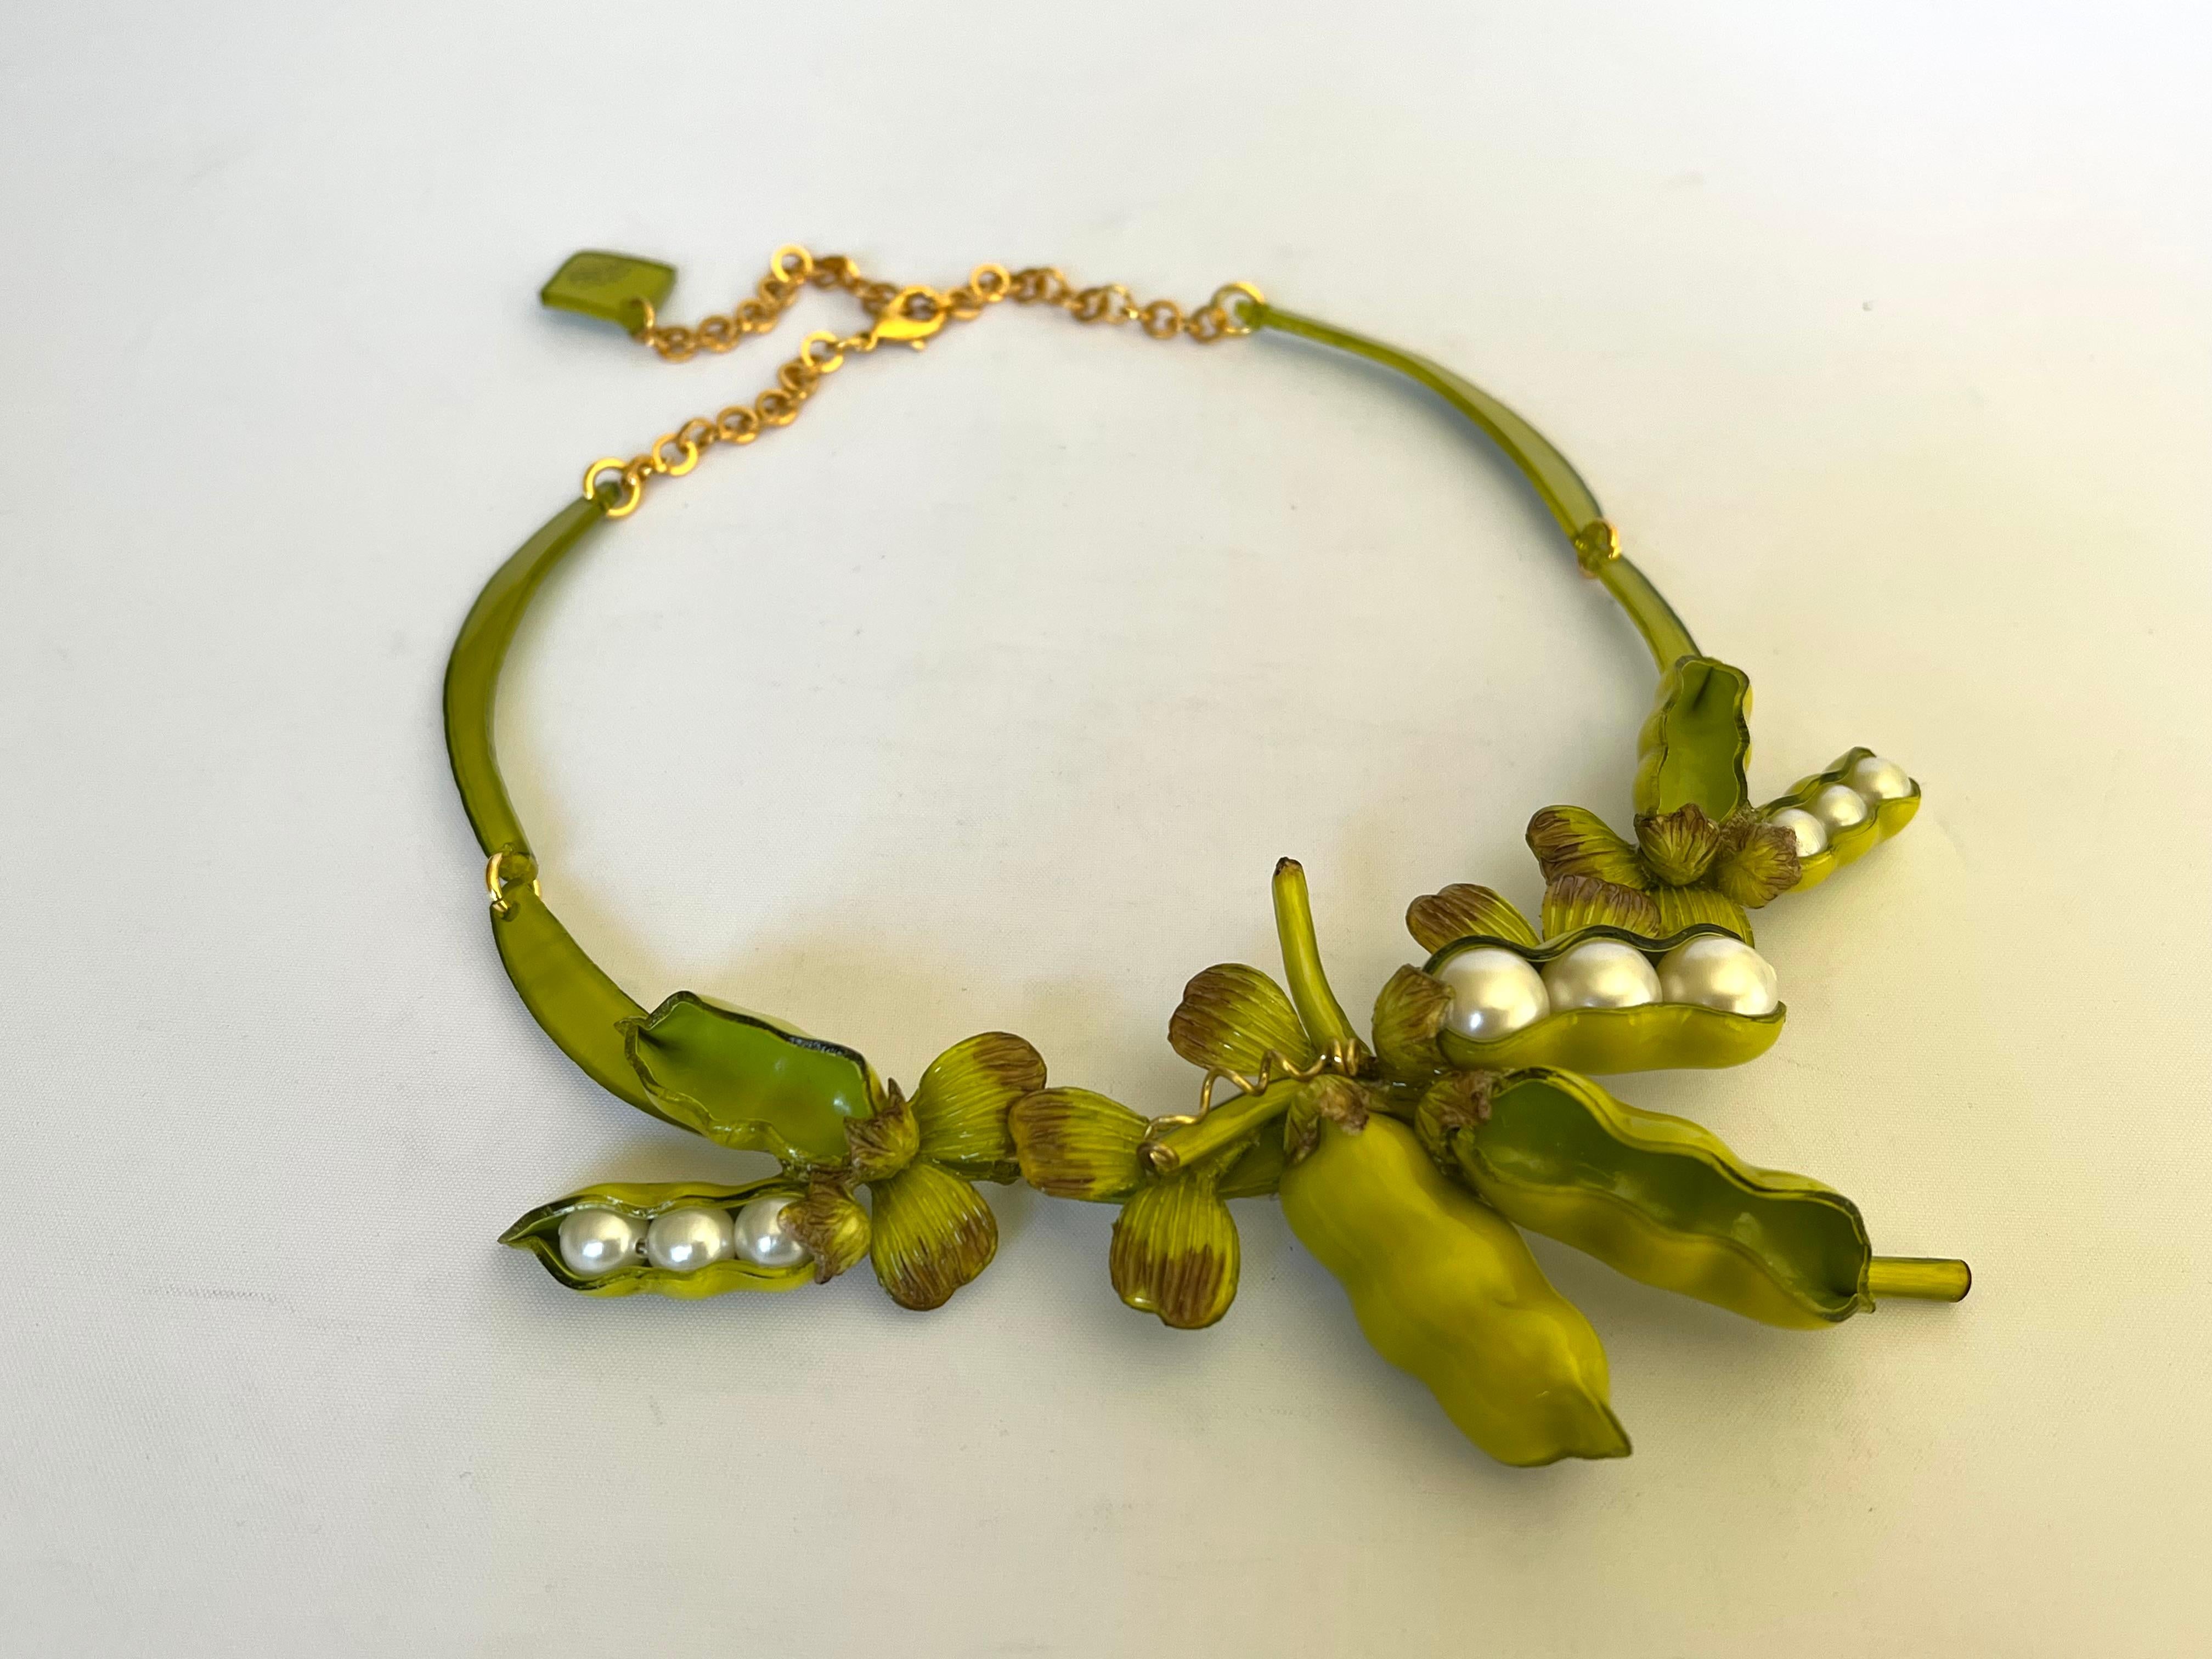 Contemporary designer giant peapod statement necklace - the bold necklace is comprised of a row of highly adorned enameline (resin and enamel) peapods. The oversized peapods feature hand-manipulated and etched acrylic details and large white faux